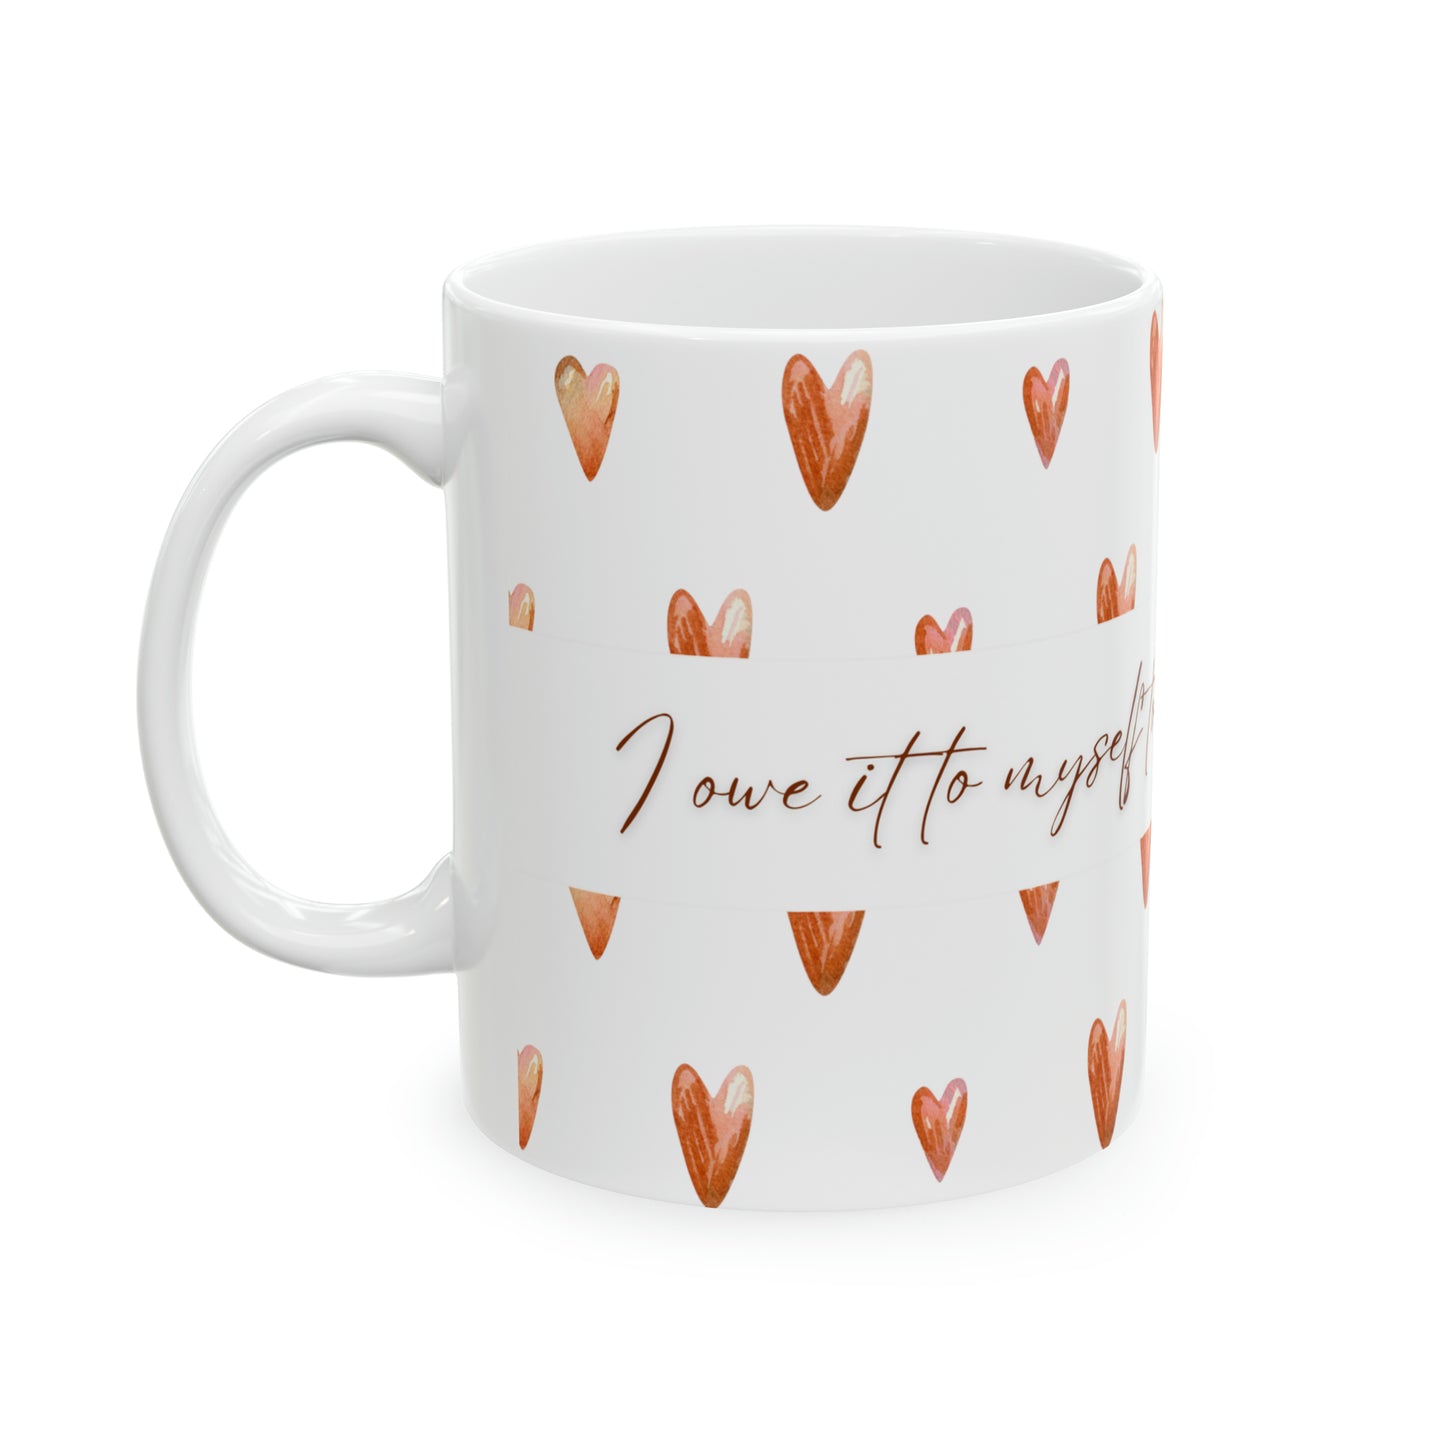 Standards of Self-Love: 'I Owe It to Myself to Have High Standards' Empowerment Mug